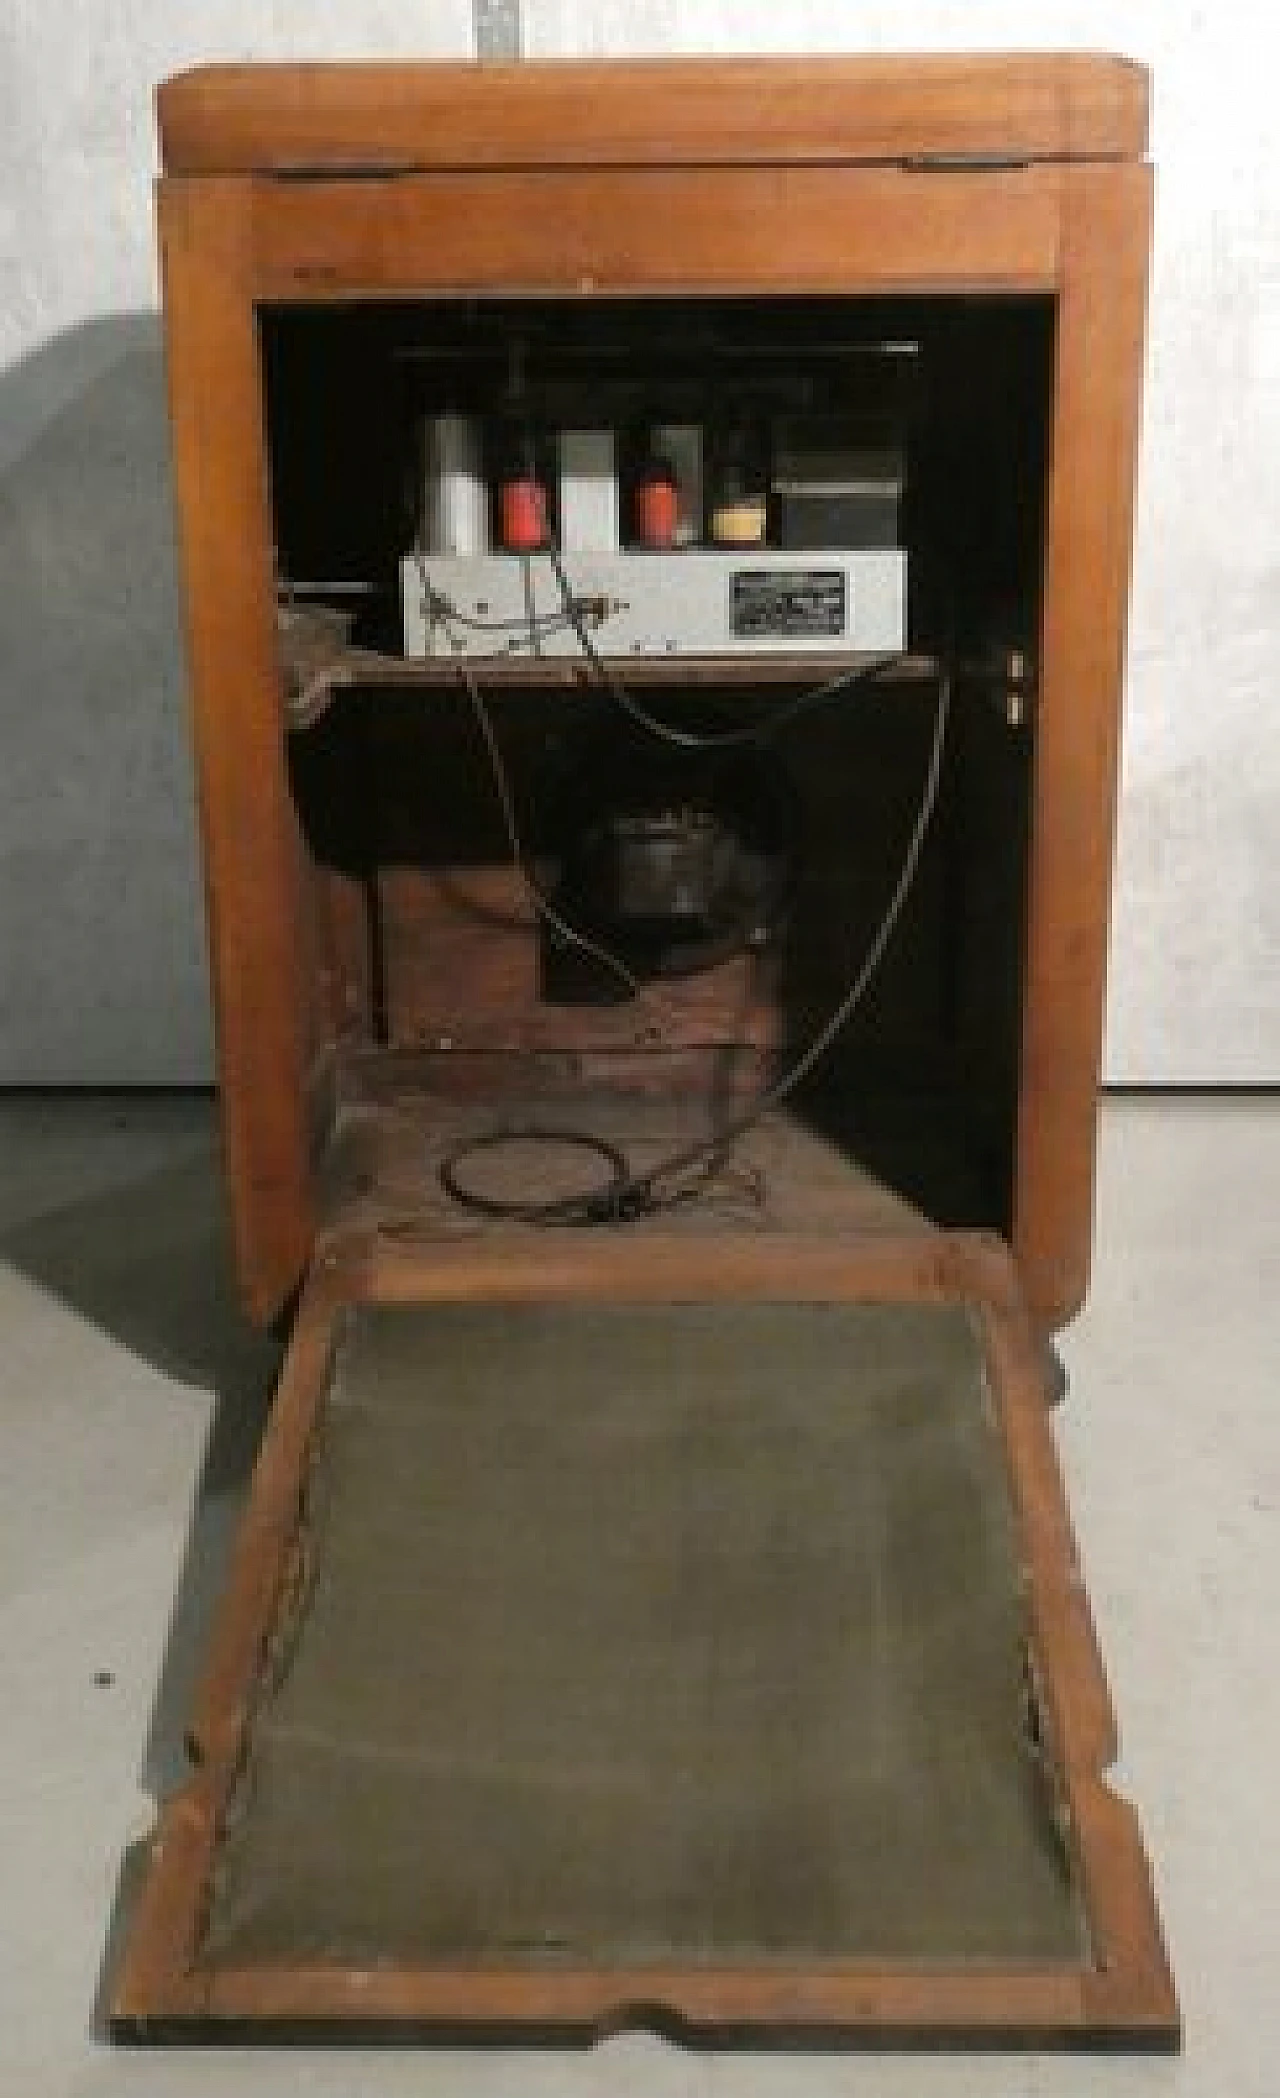 Marconi 1562 radio cabinet with turntable by Compagnia Marconi, 1940 27